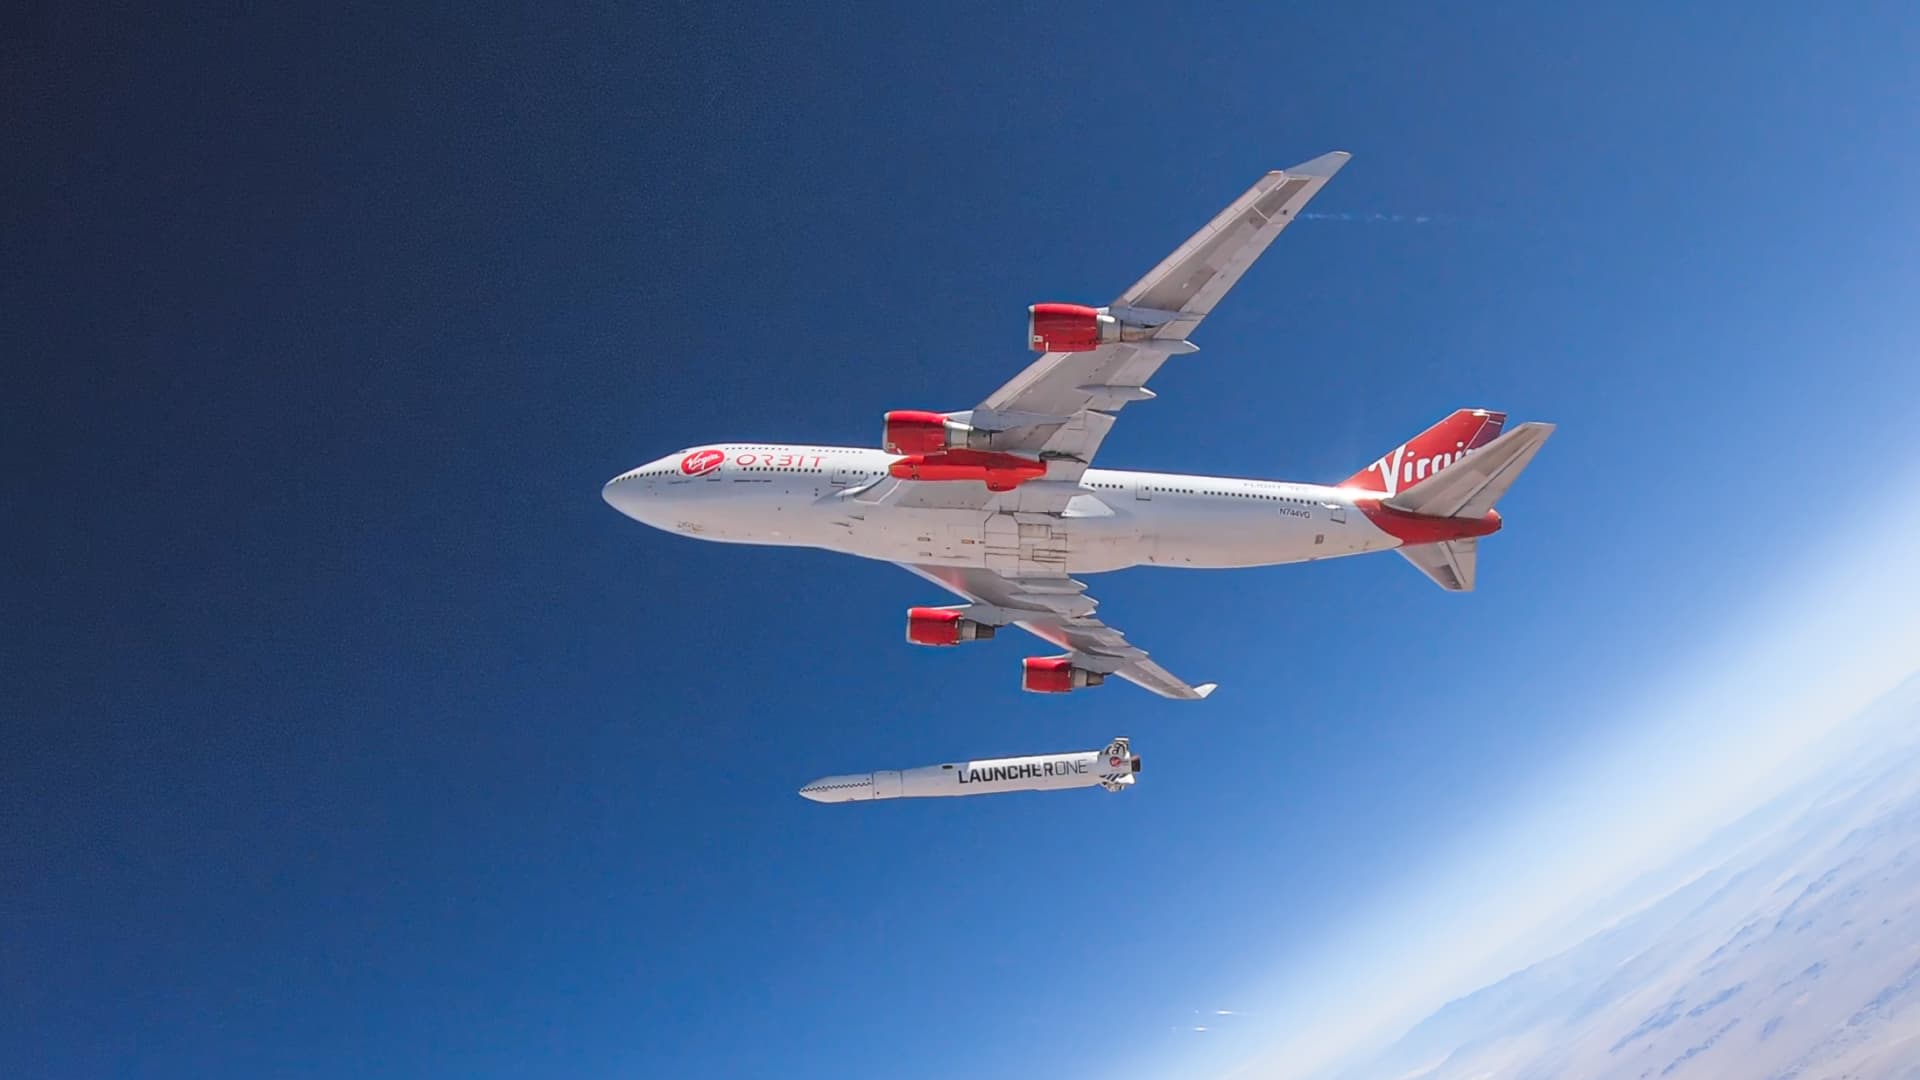 Virgin Orbit was a promising company that could never find a working business model